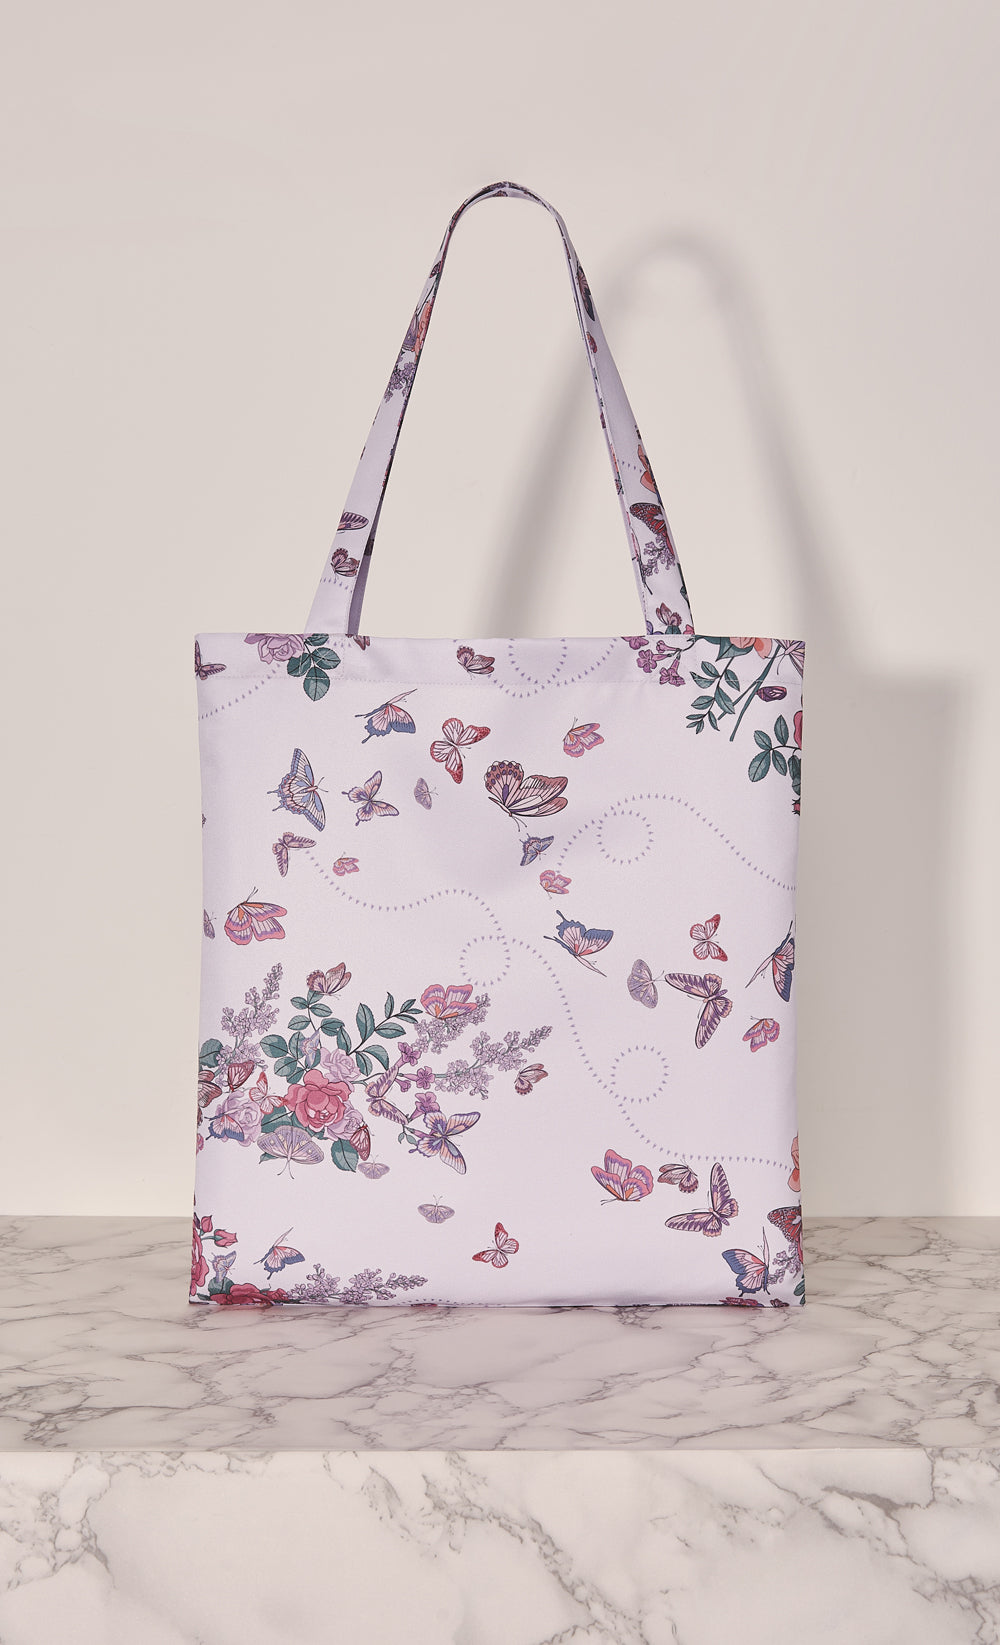 The Butterfly dUCk Totes in Flourish